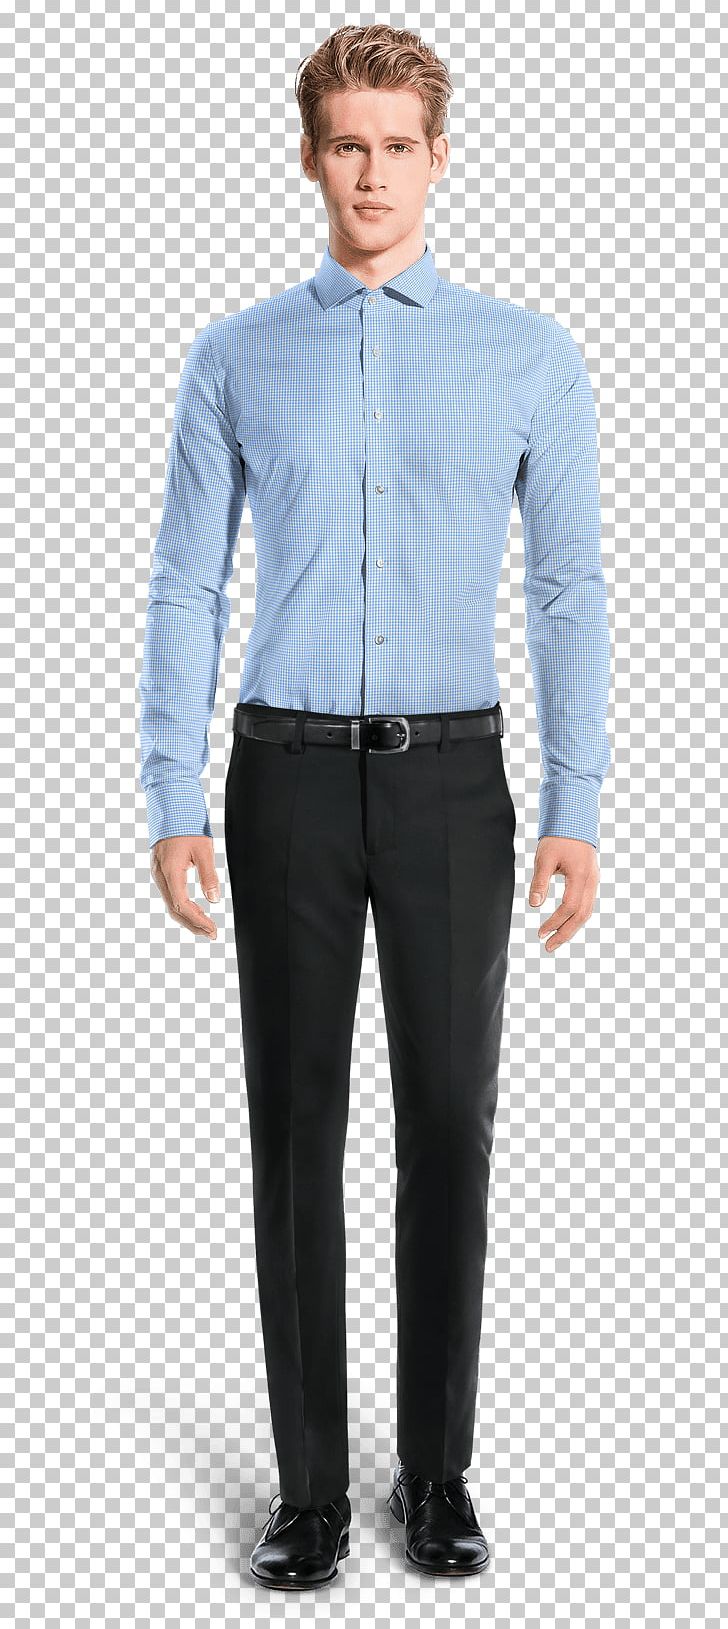 Tweed Suit Pants Chino Cloth Wool PNG, Clipart, Blue, Businessperson, Chino Cloth, Clothing, Collar Free PNG Download